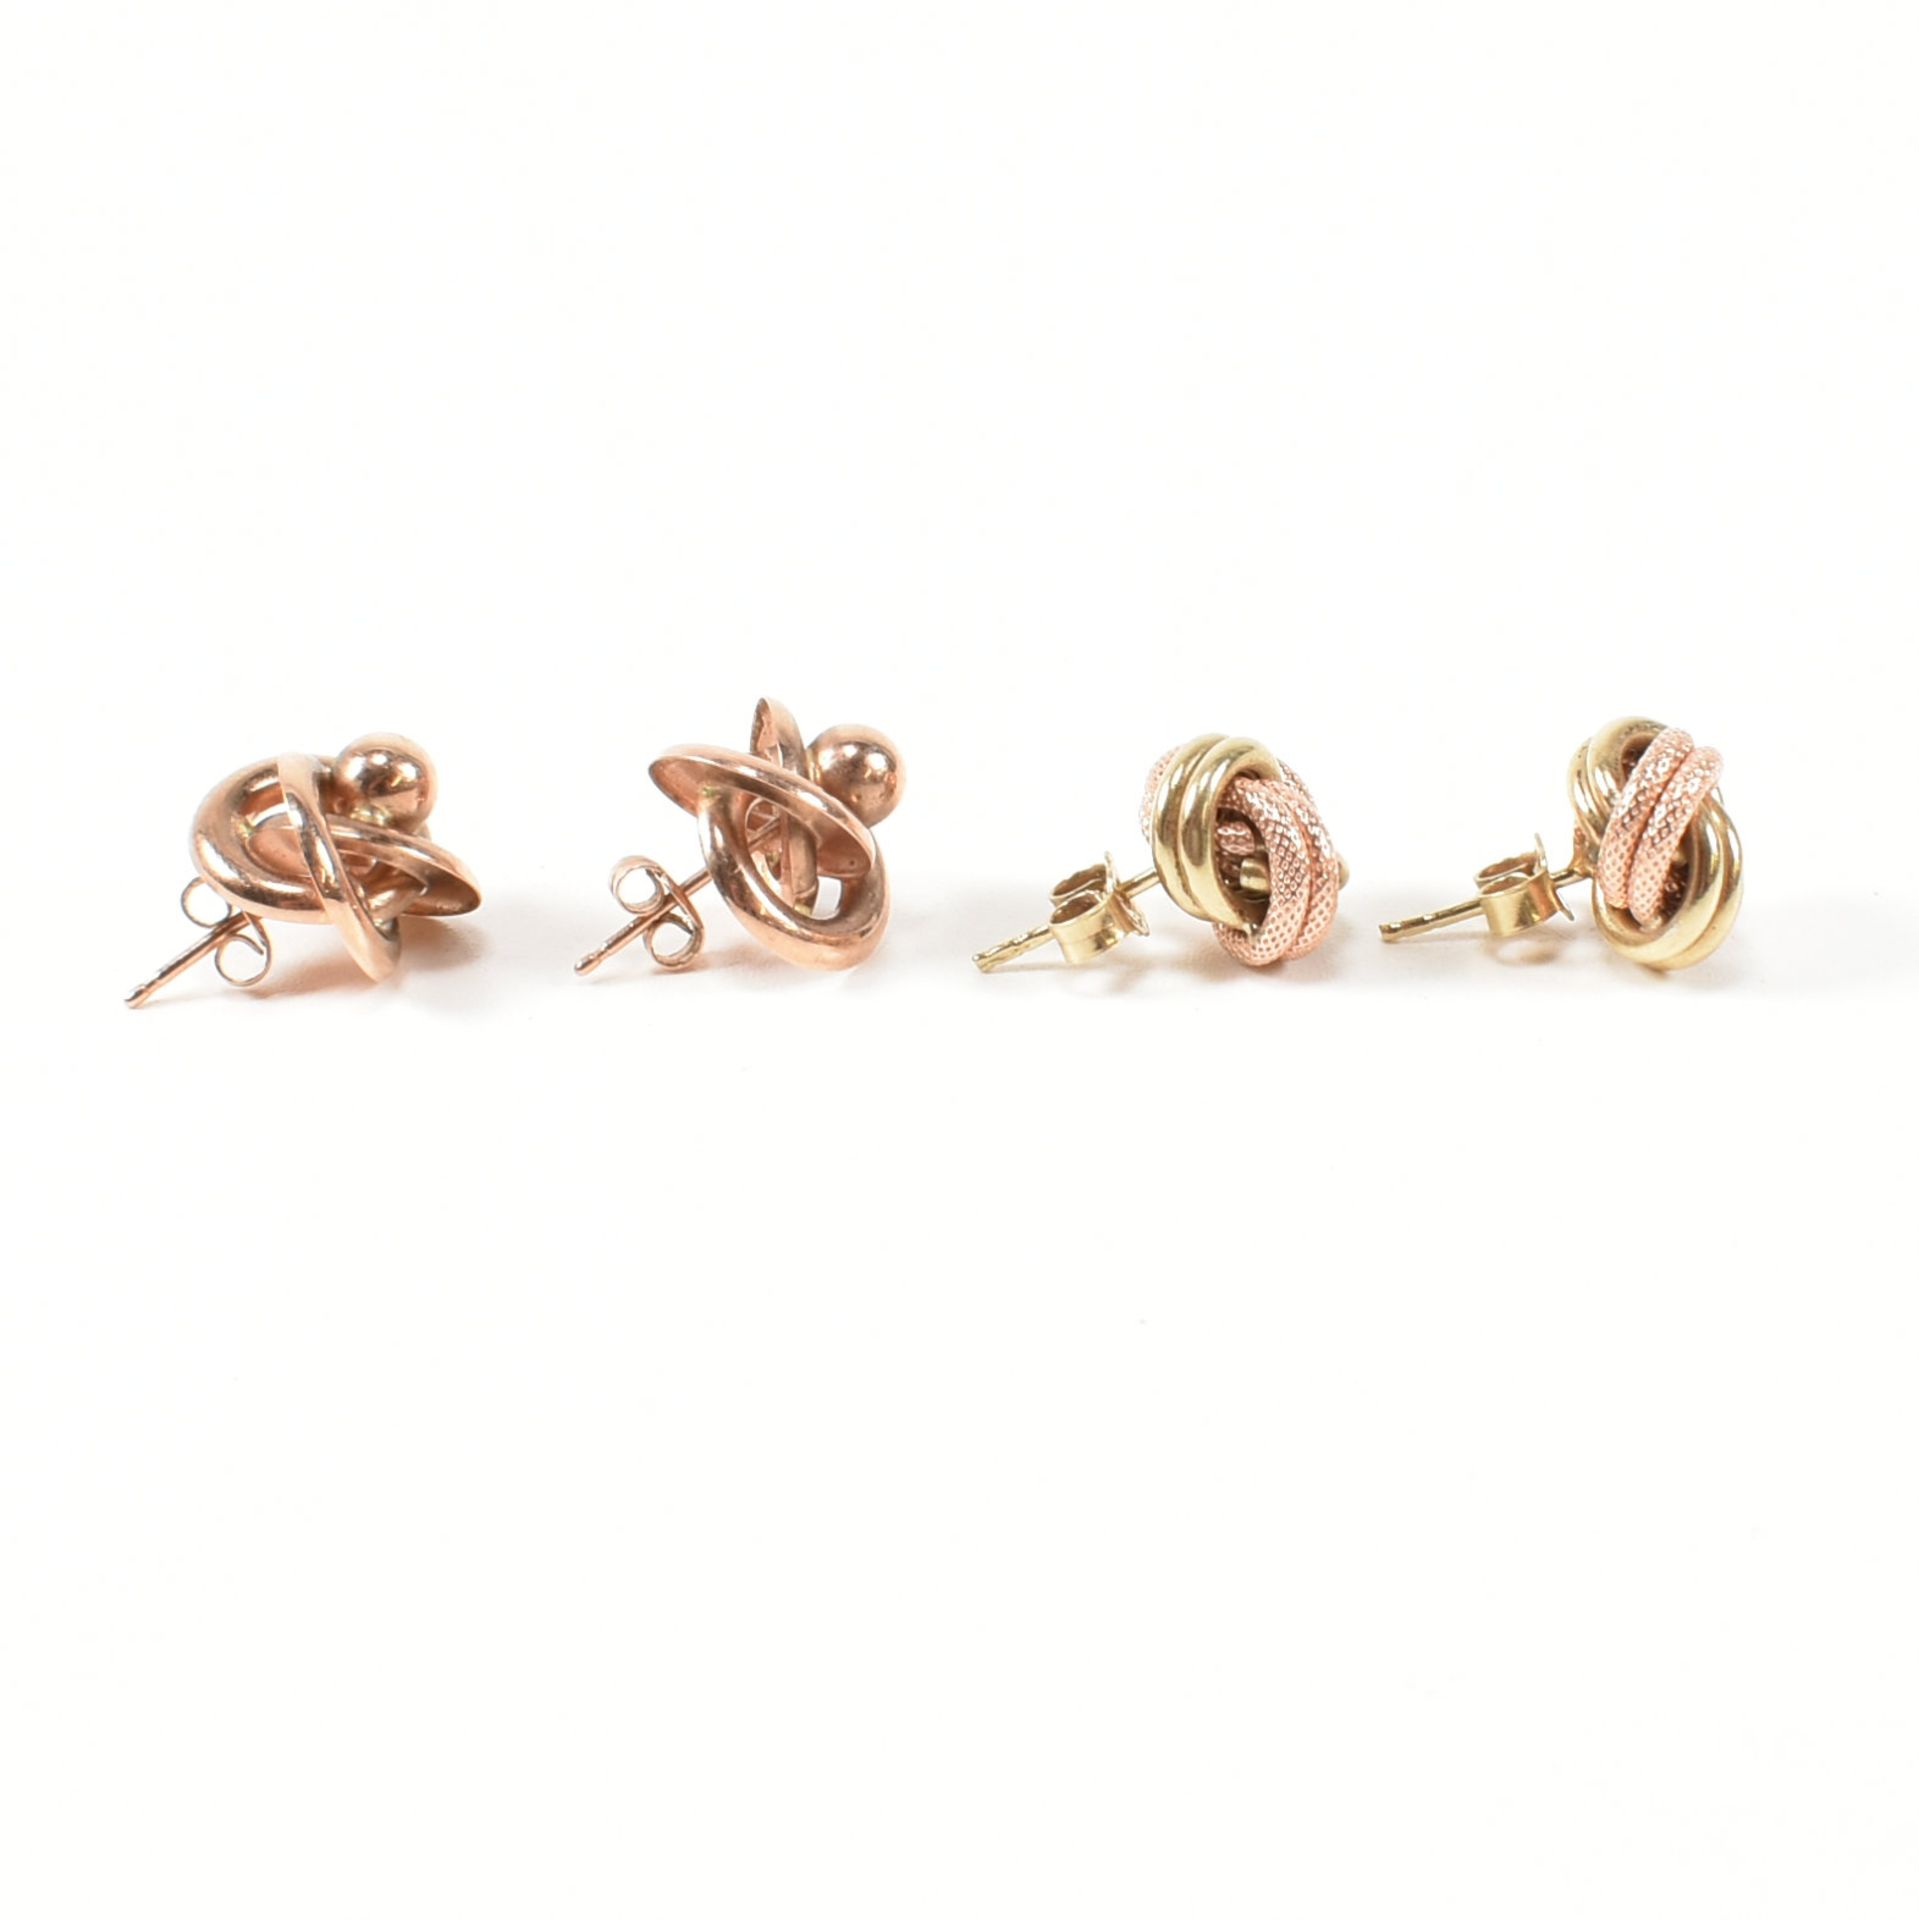 TWO 9CT GOLD KNOT STUD EARRINGS - Image 4 of 5